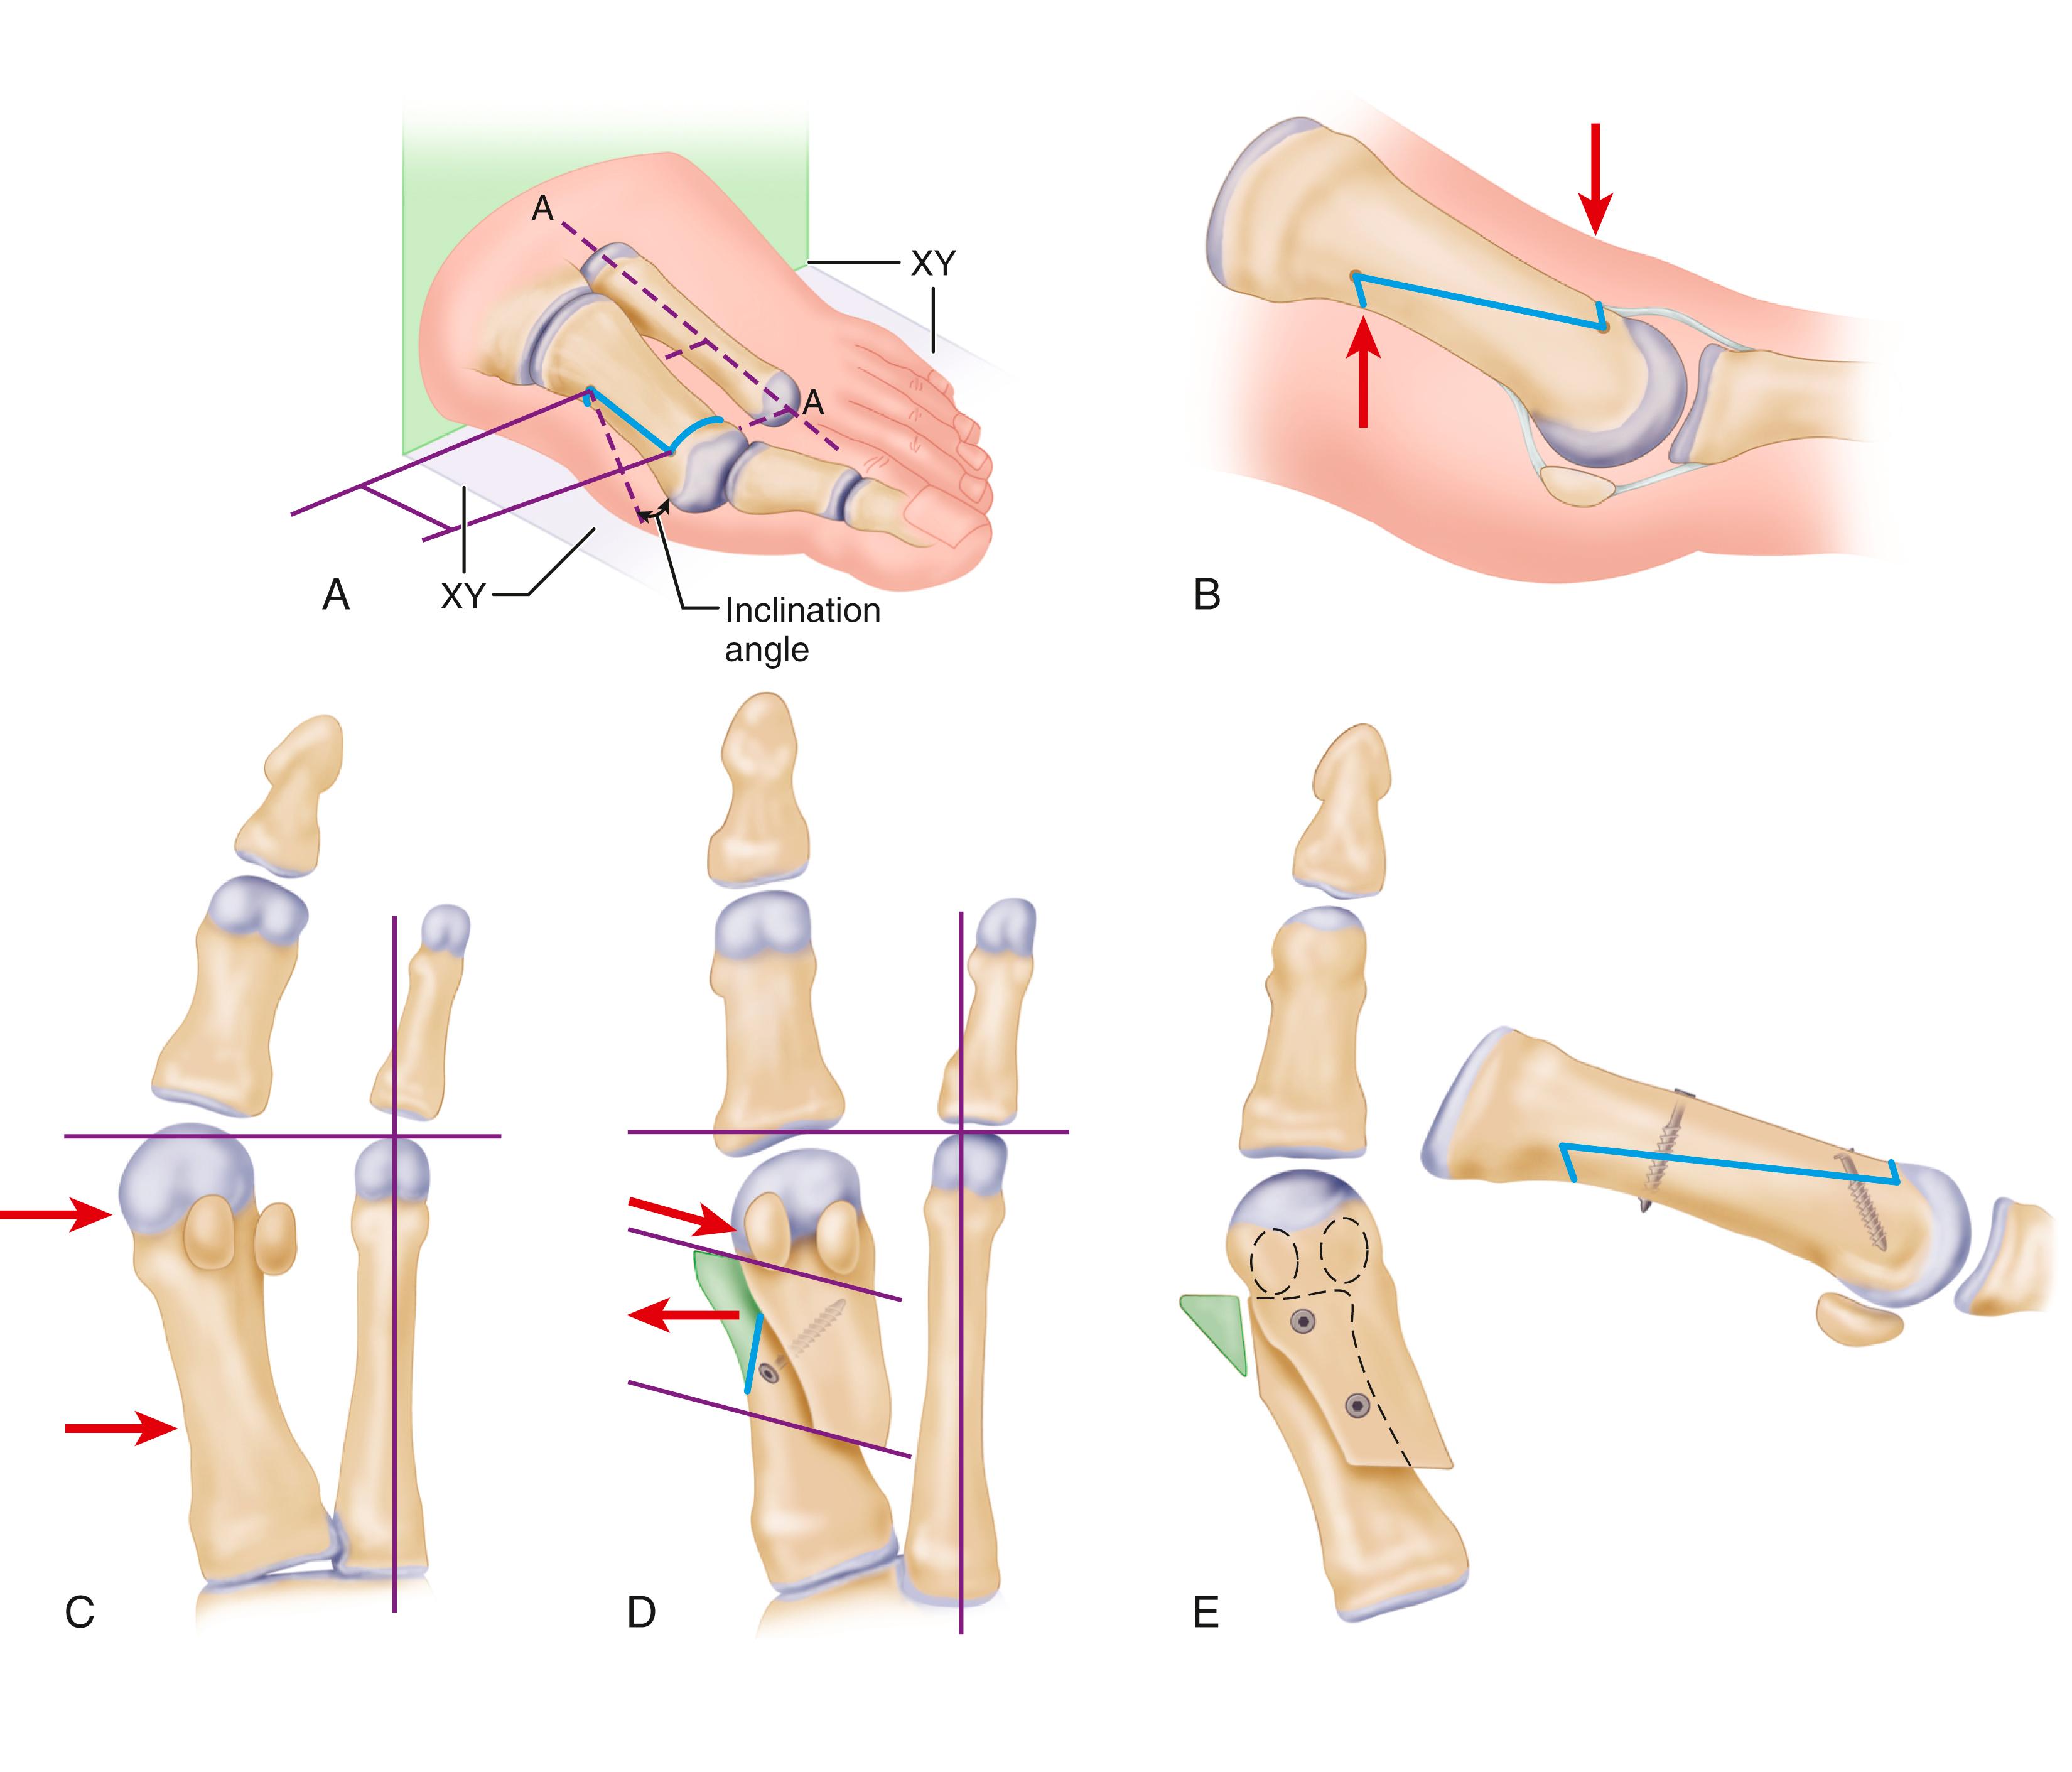 FIGURE 82.48, Scarf osteotomy. A, Placement of Kirschner wires at corner point of planned osteotomy. Standard orientation for lateral translation is 90 degrees to longitudinal axis of second metatarsal (A) and in approximately 20 degrees horizontal inclination to plantar surface (XY). B, Osteotomy cuts. C, Lateral displacement is obtained if short osteotomy cuts are perpendicular to longitudinal axis of foot. D, Proximally oriented inclination of short osteotomy cuts caused shortening depending on angle of inclination and amount of translation. E, After lateral displacement, osteotomy is fixed with two minifragment screws. ( A - D redrawn from Kristen KH, Berger C, Stelzig S, et al: The scarf osteotomy for the correction of hallux valgus deformities, Foot Ankle Int 23:221, 2002; E redrawn from Jones S, Al Hussainy HA, Ali F, et al: Scarf osteotomy for hallux valgus: a prospective clinical and pedobarographic study, J Bone Joint Surg 86B:830, 2004. Copyright British Editorial Society of Bone and Joint Surgery.) SEE TECHNIQUE 82.11 .